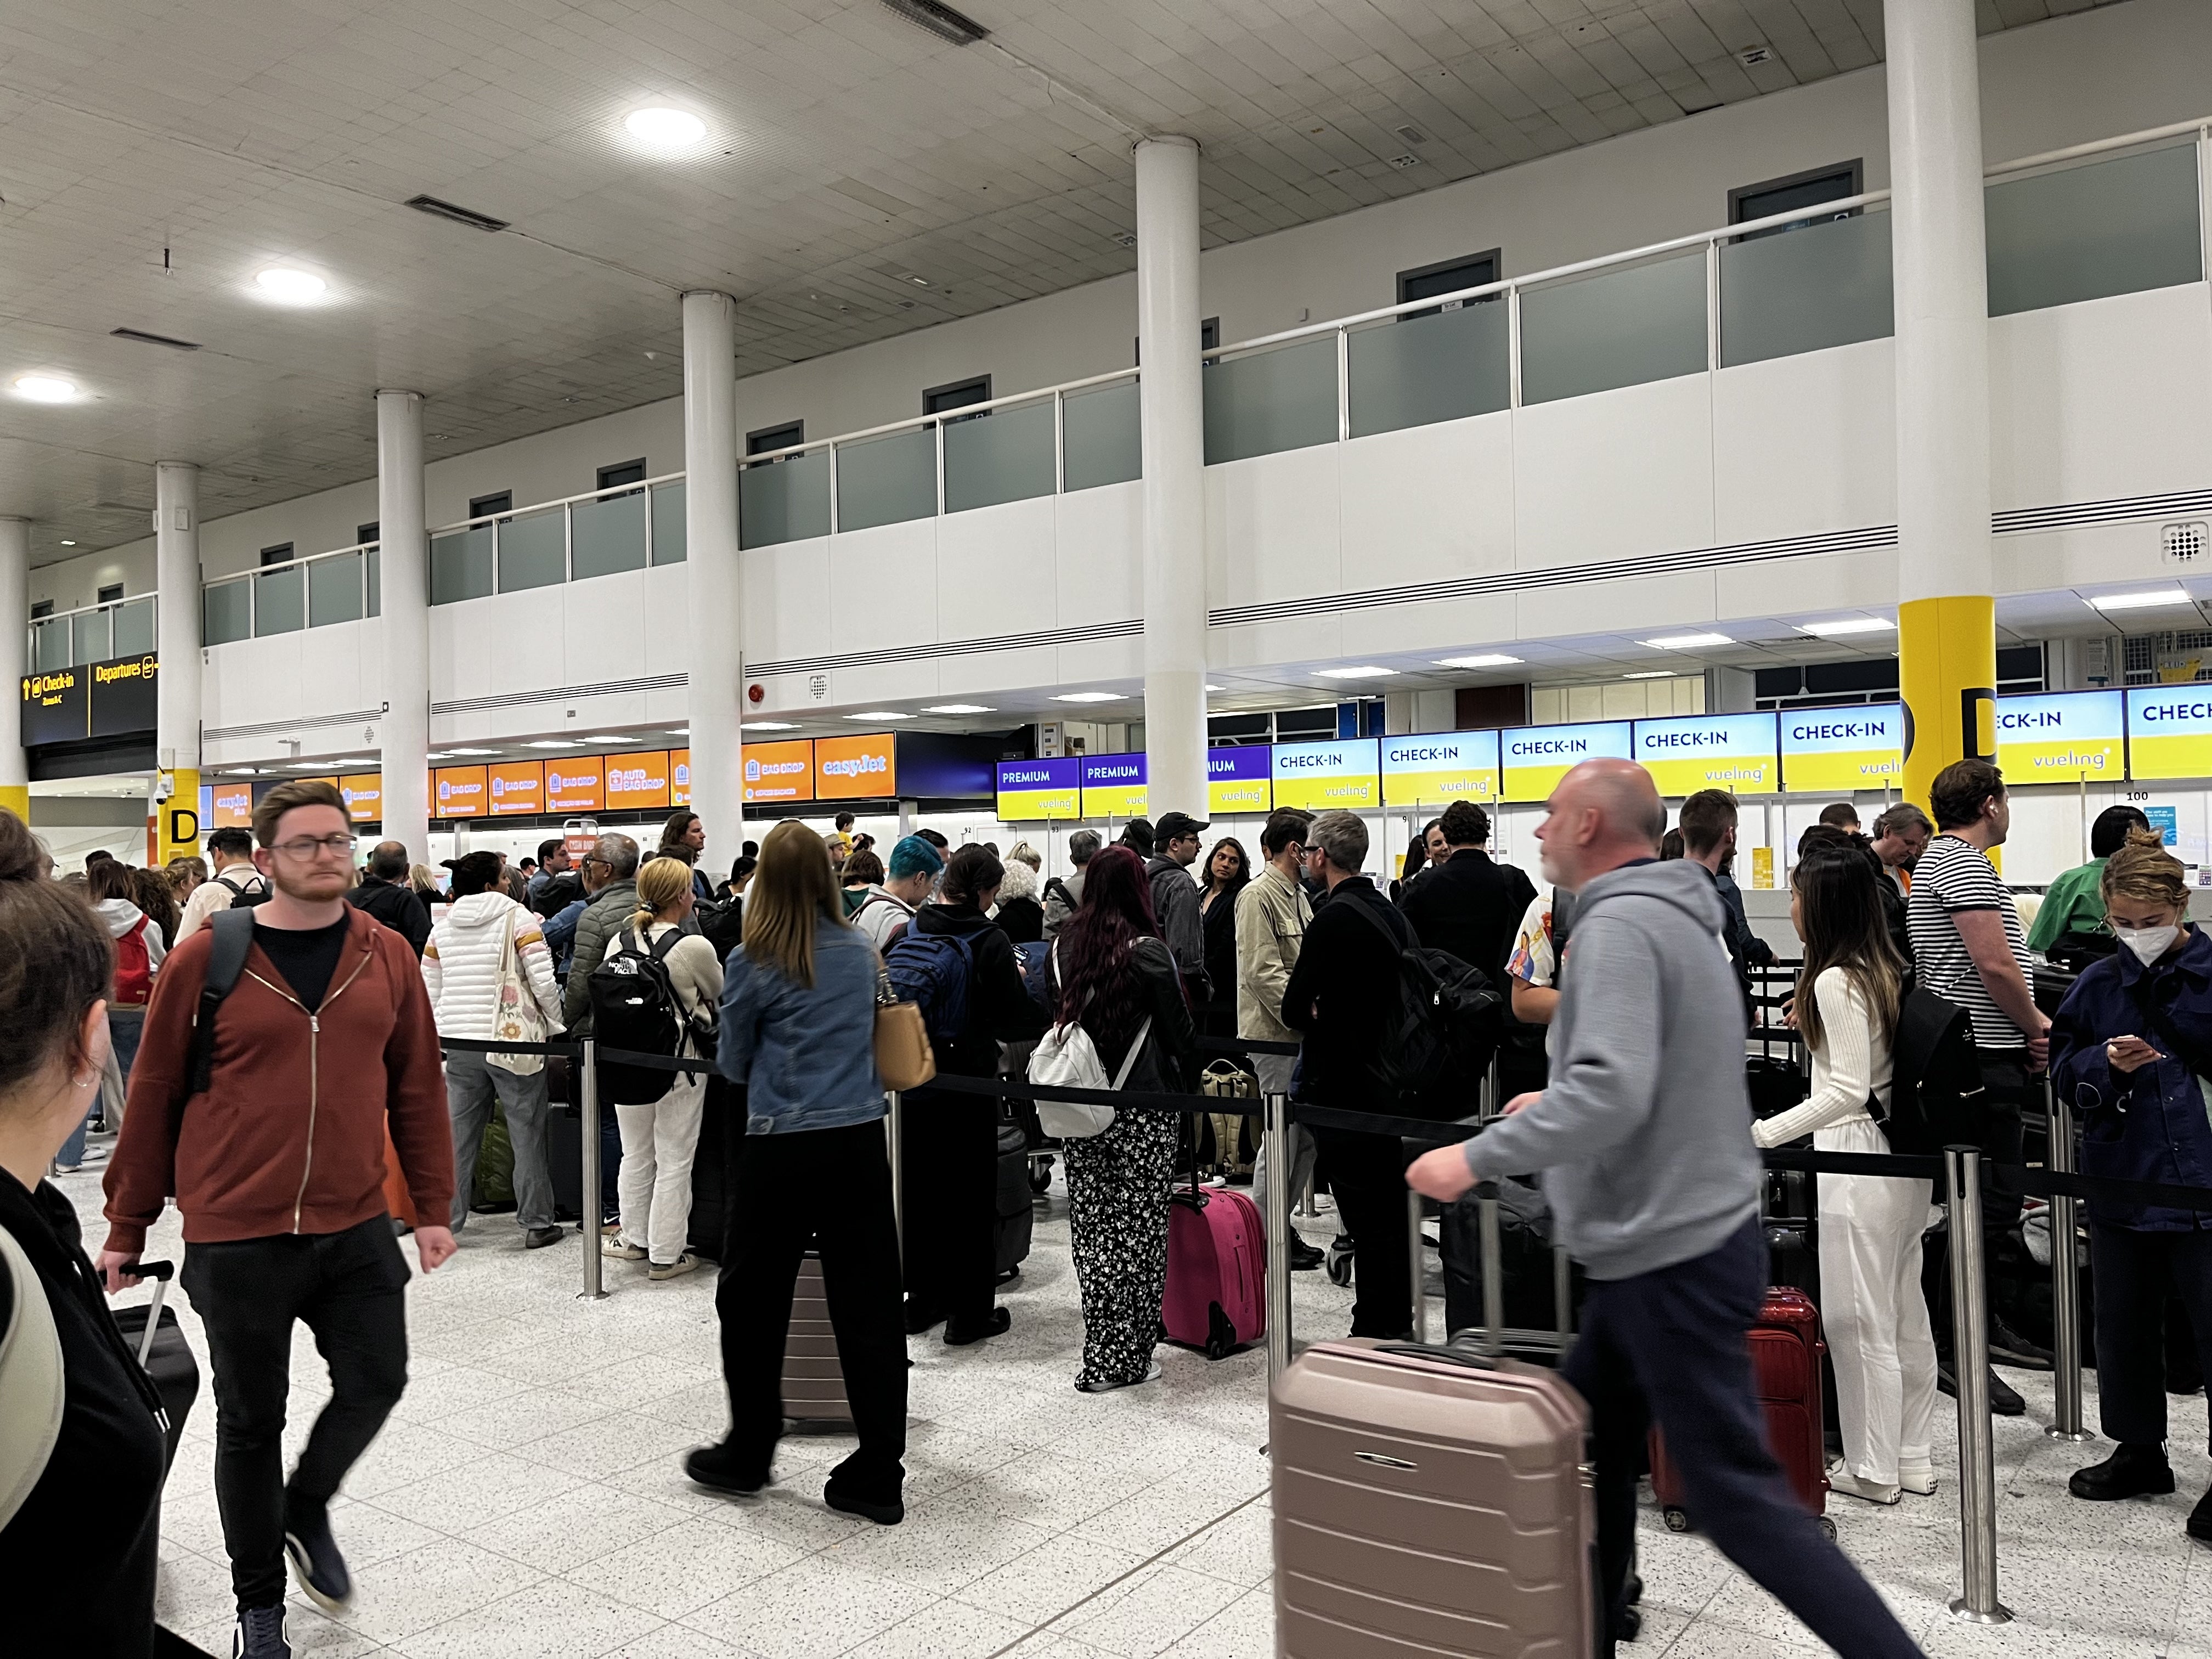 There have been lengthy queues at some of Britain’s airports already during half-term (Stephen Jones/PA)